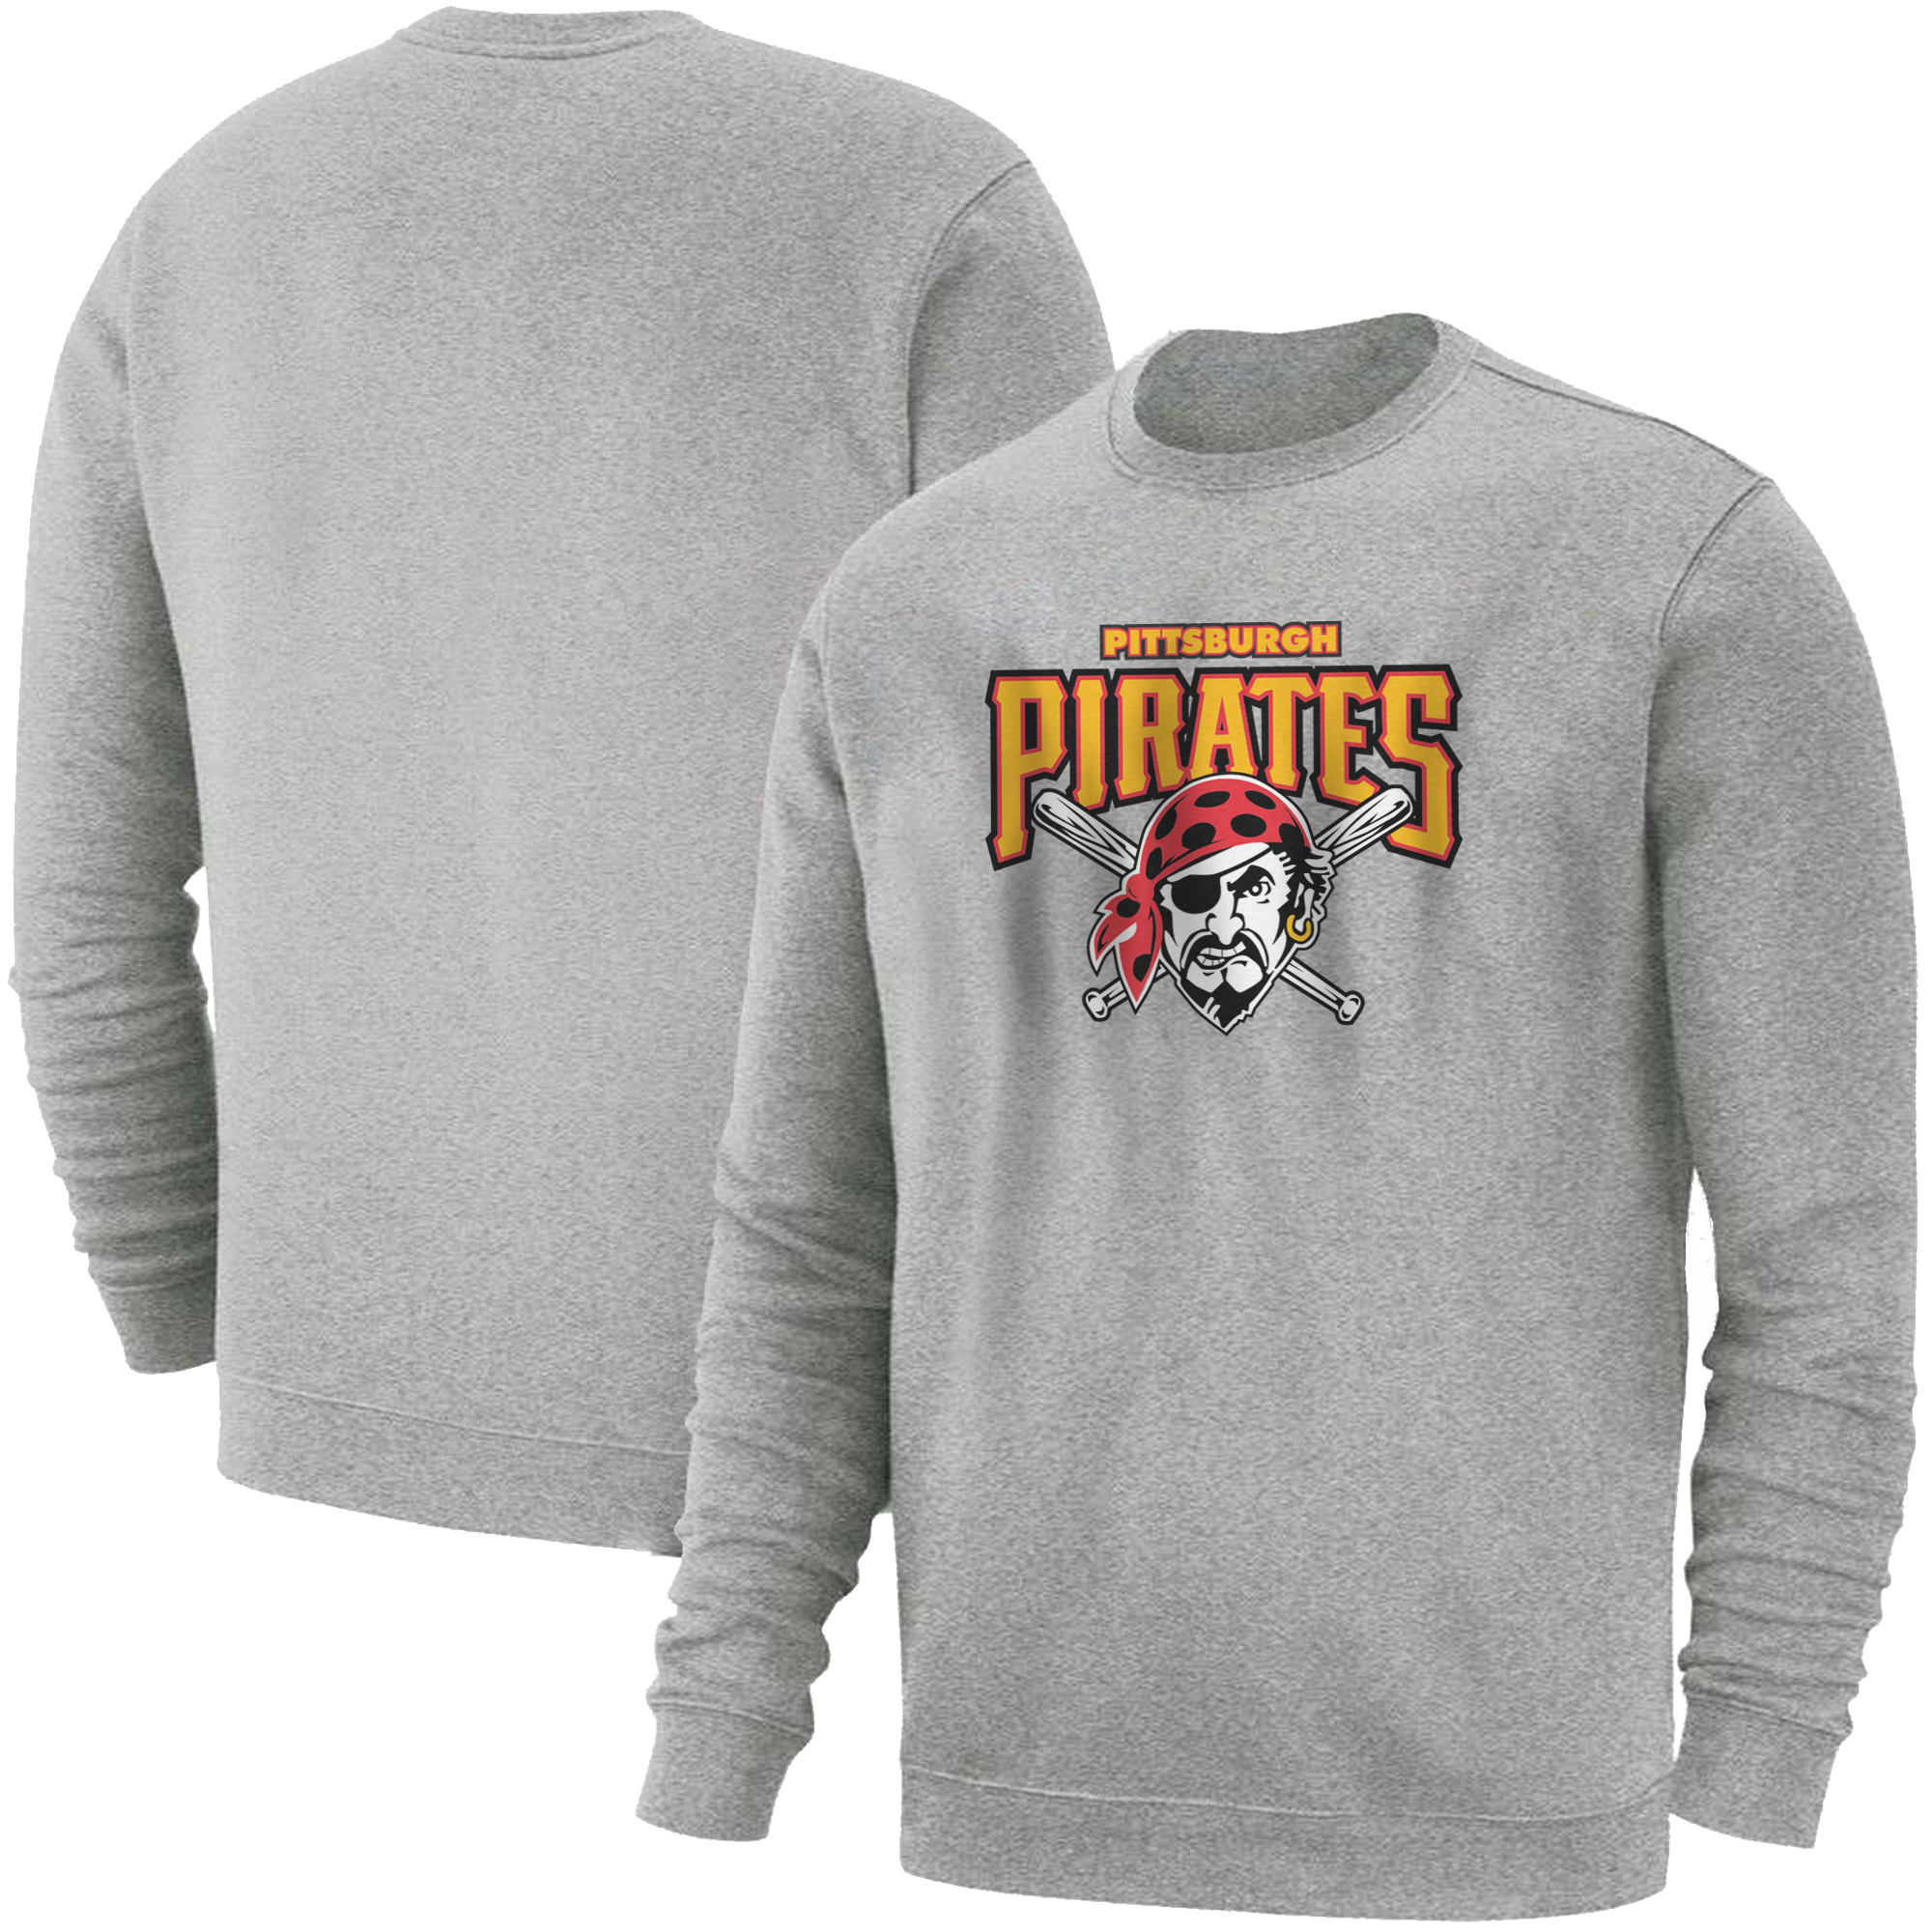 Pittsburgh Pirates Basic (BSC-GRY-6011-Pittsburgh )